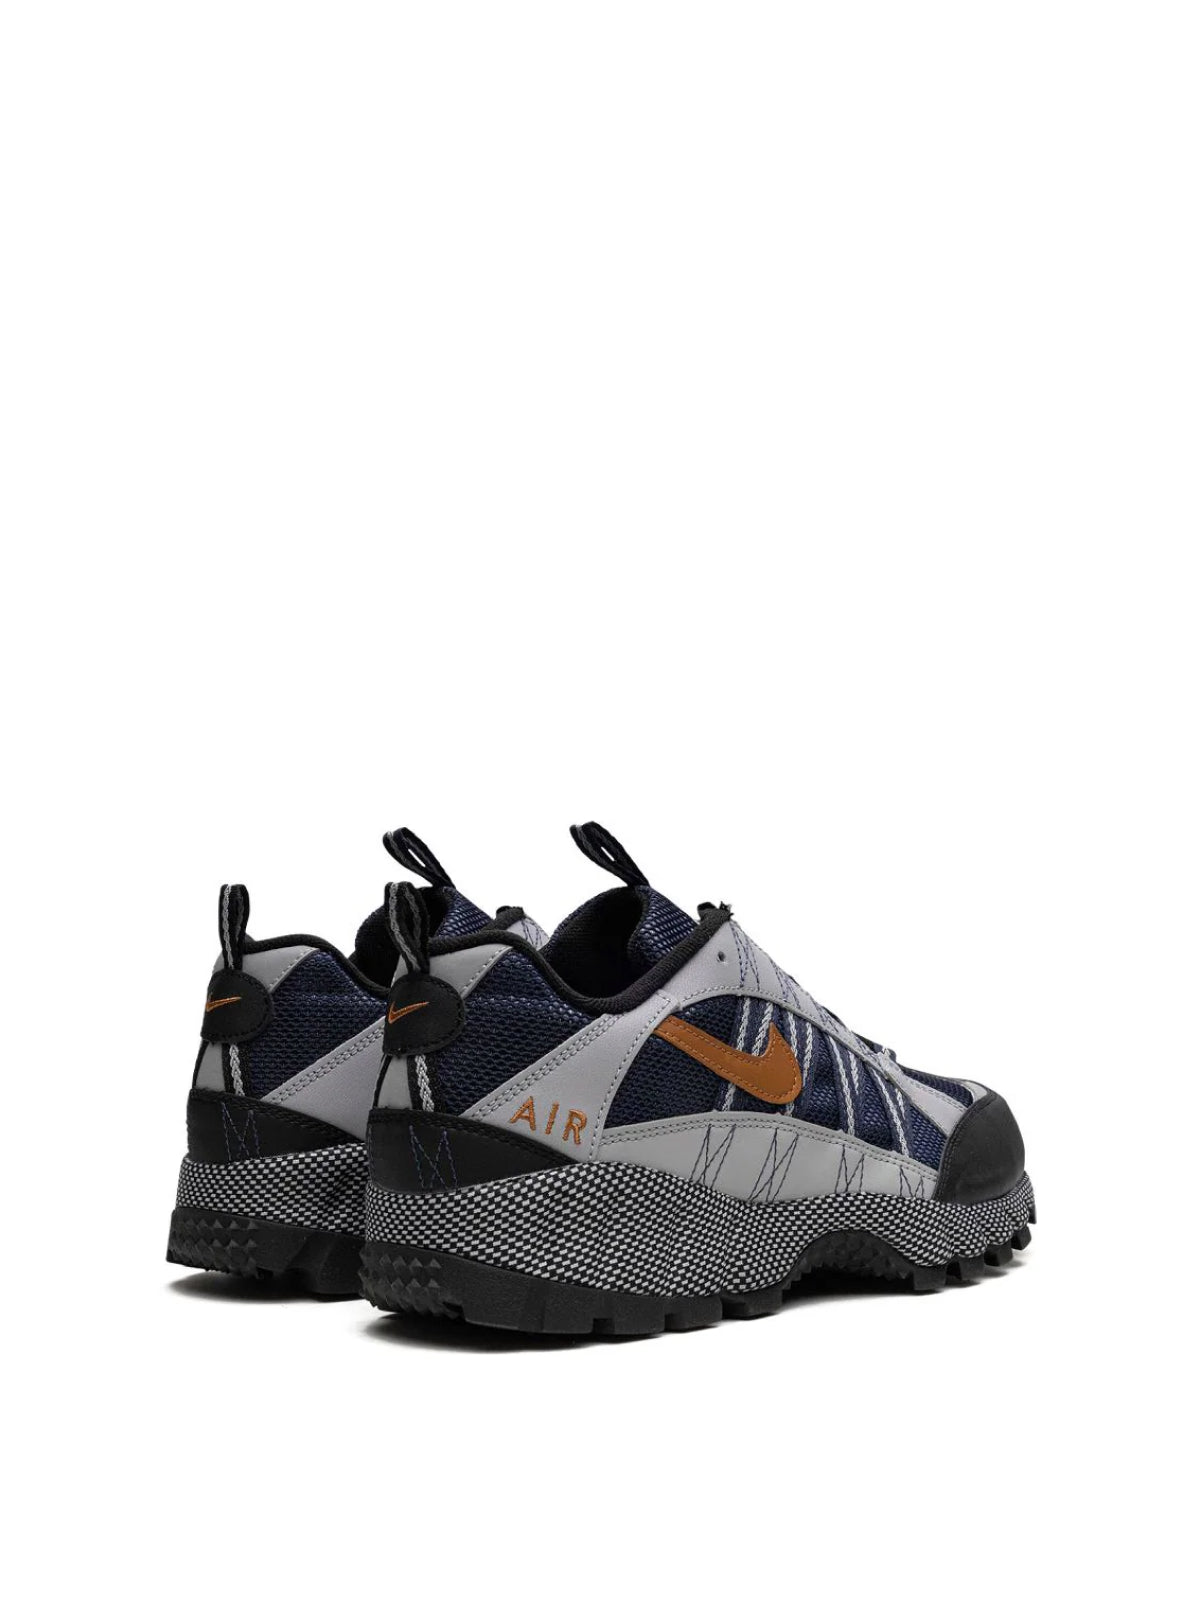 Nike-OUTLET-SALE-Air Humara QS Sneakers-ARCHIVIST